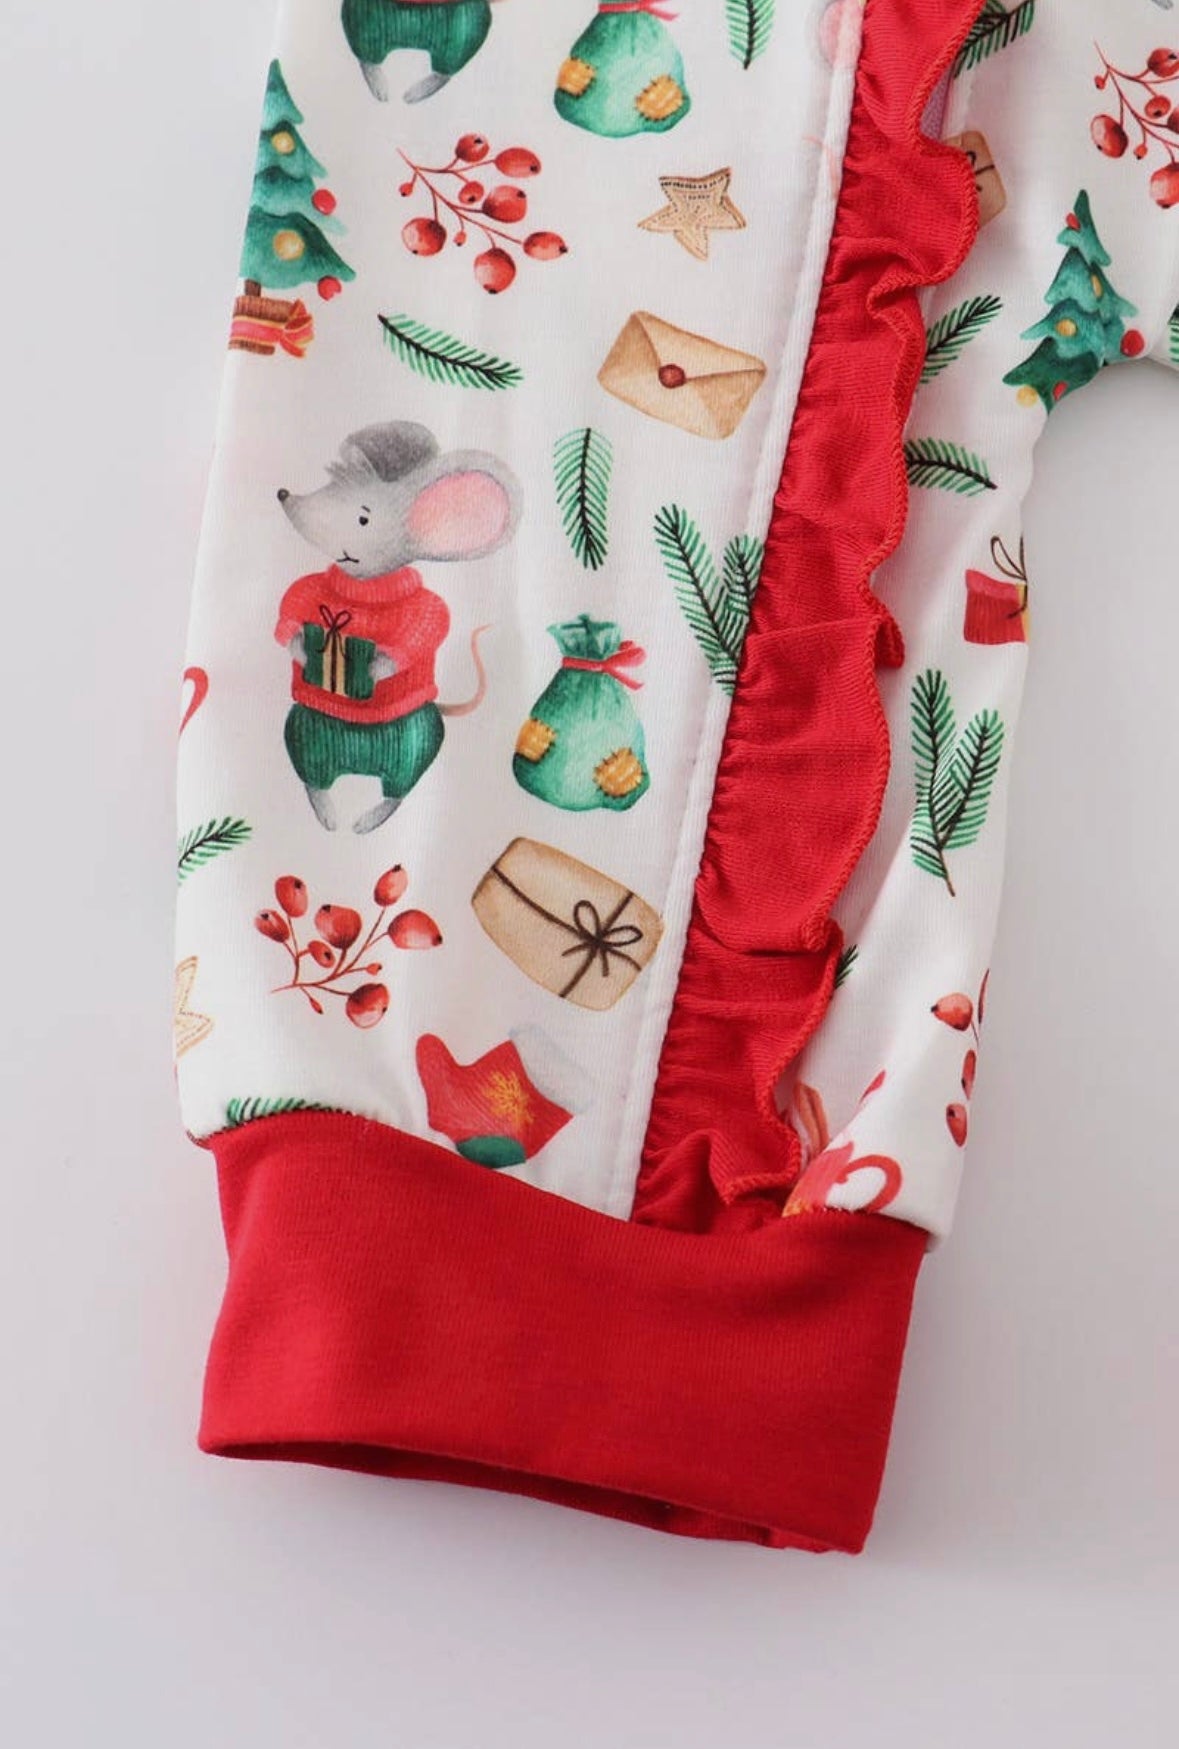 Mouse and Gift Christmas Zipper Romper